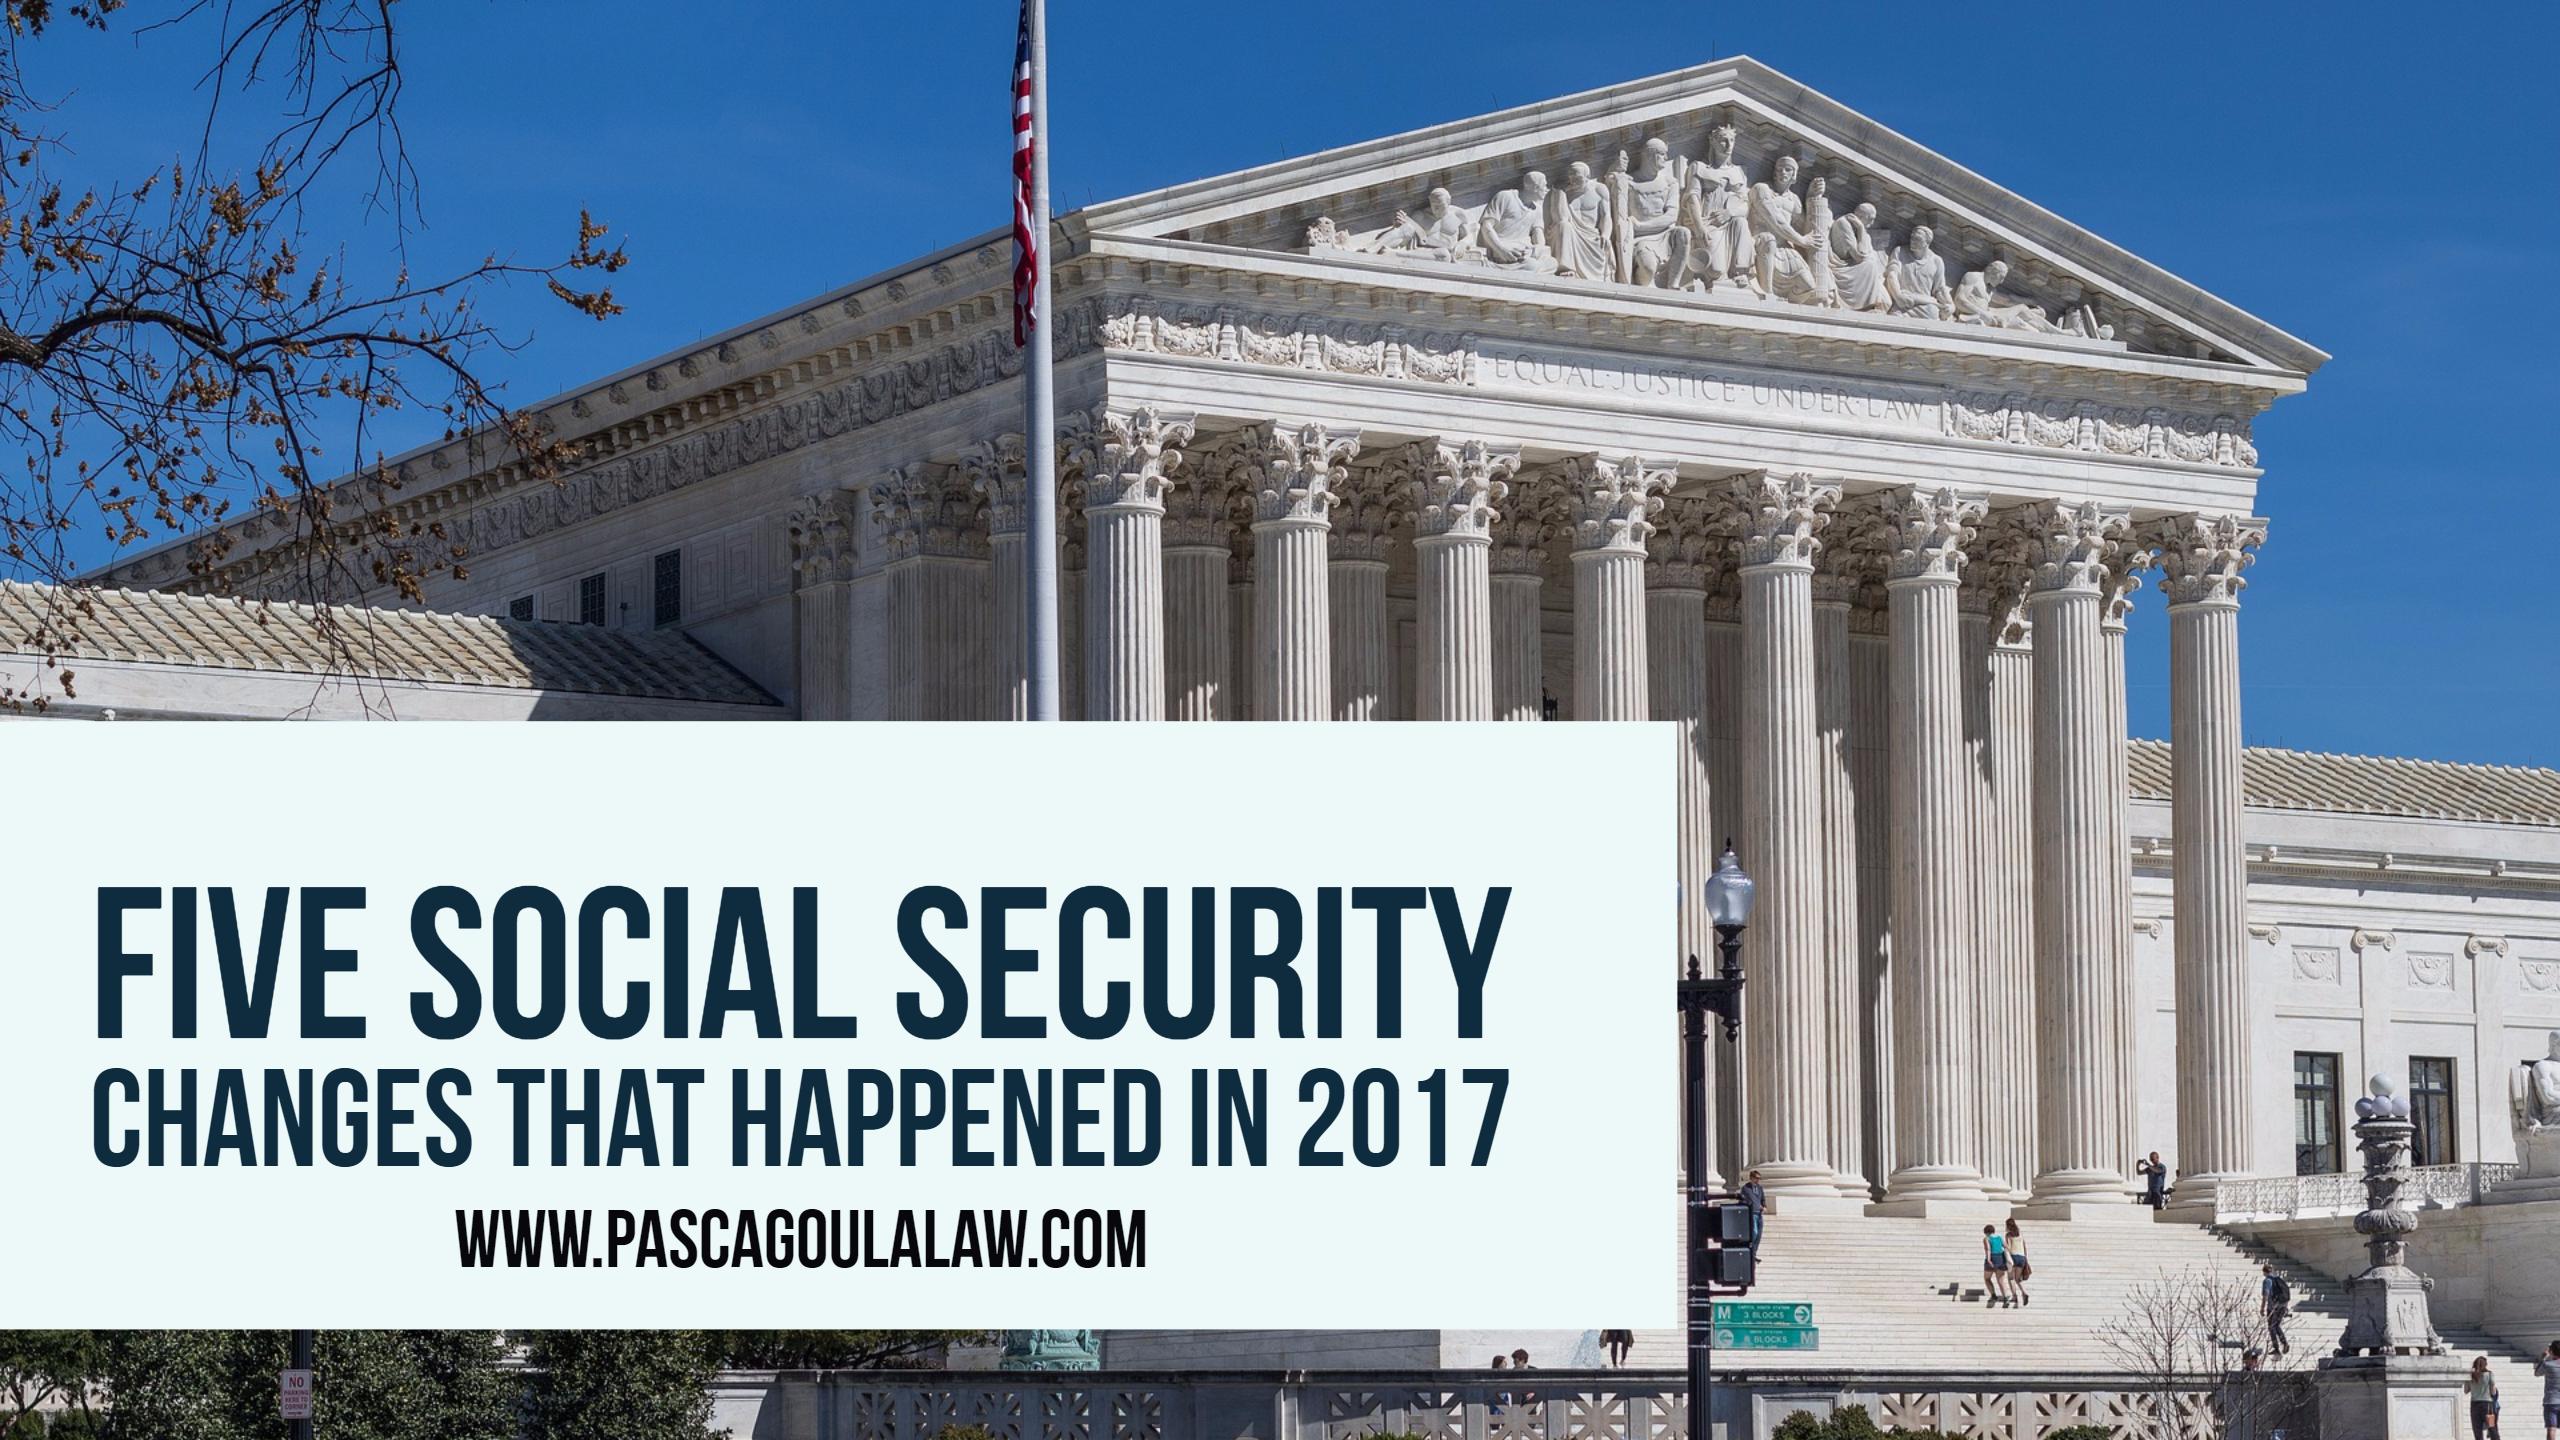 FIVE SOCIAL SECURITY CHANGES THAT HAPPENED IN 2017